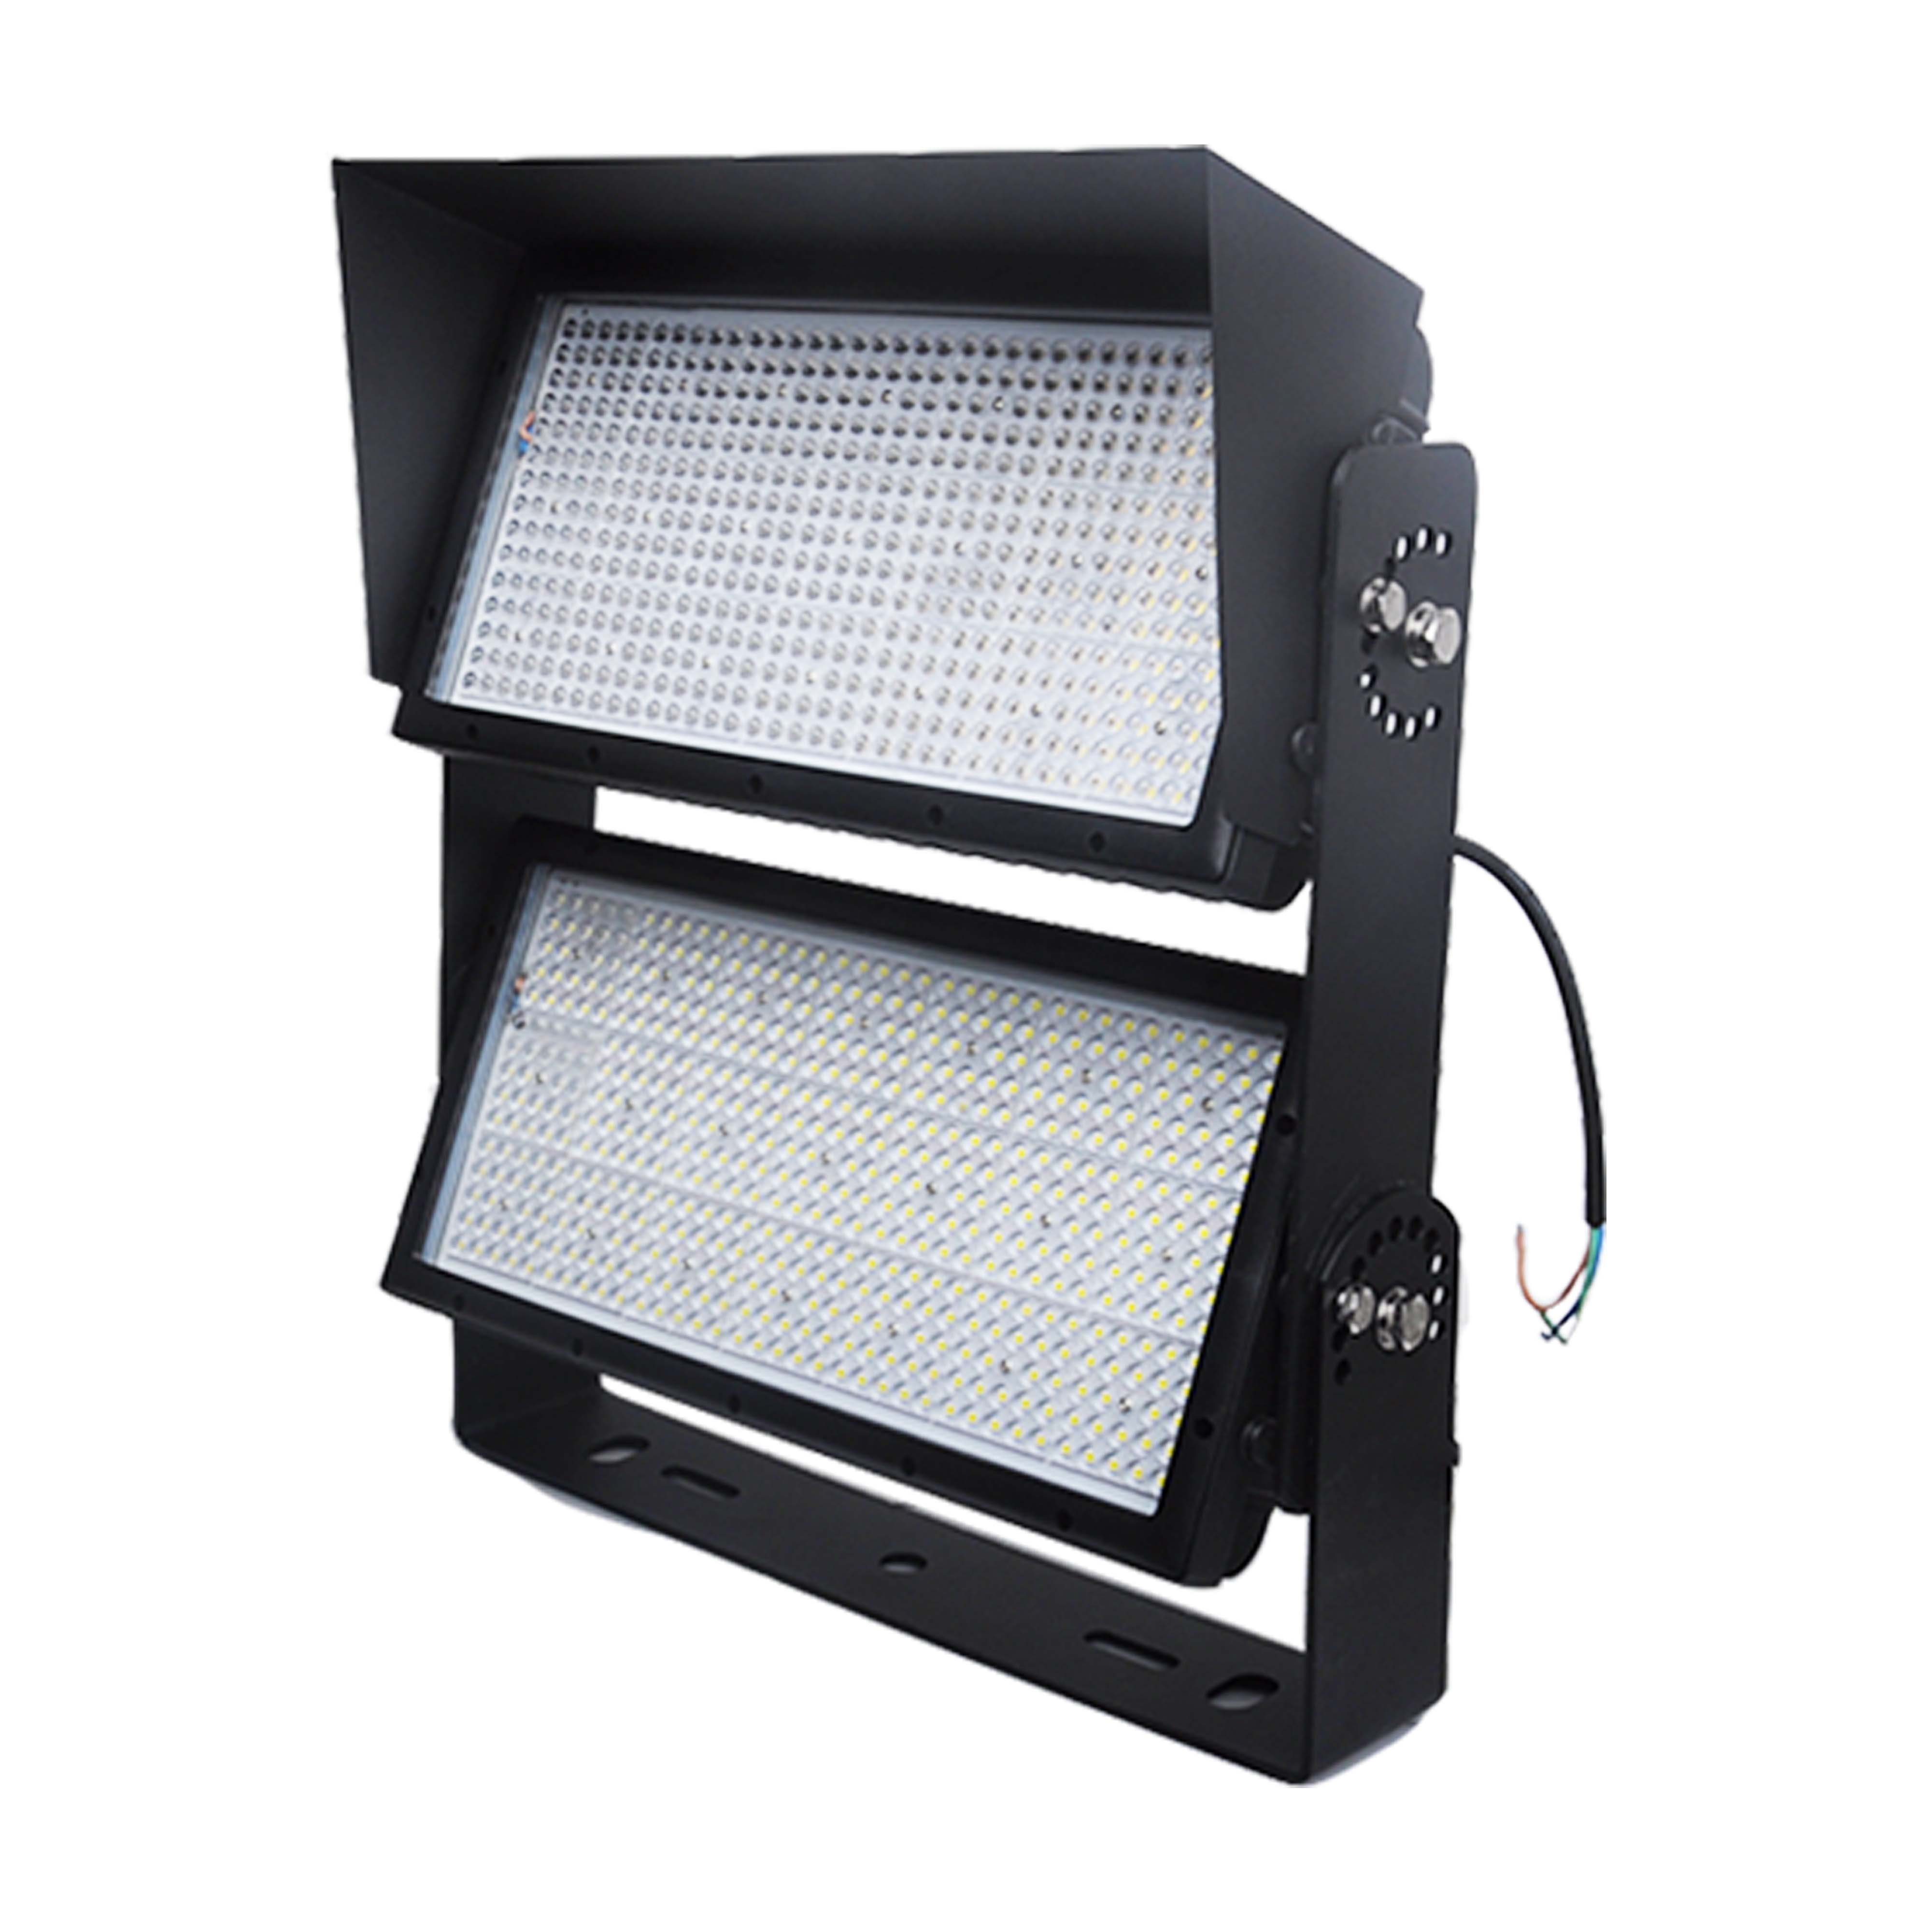 Bright, Efficient, and Durable LED Flood Lighting